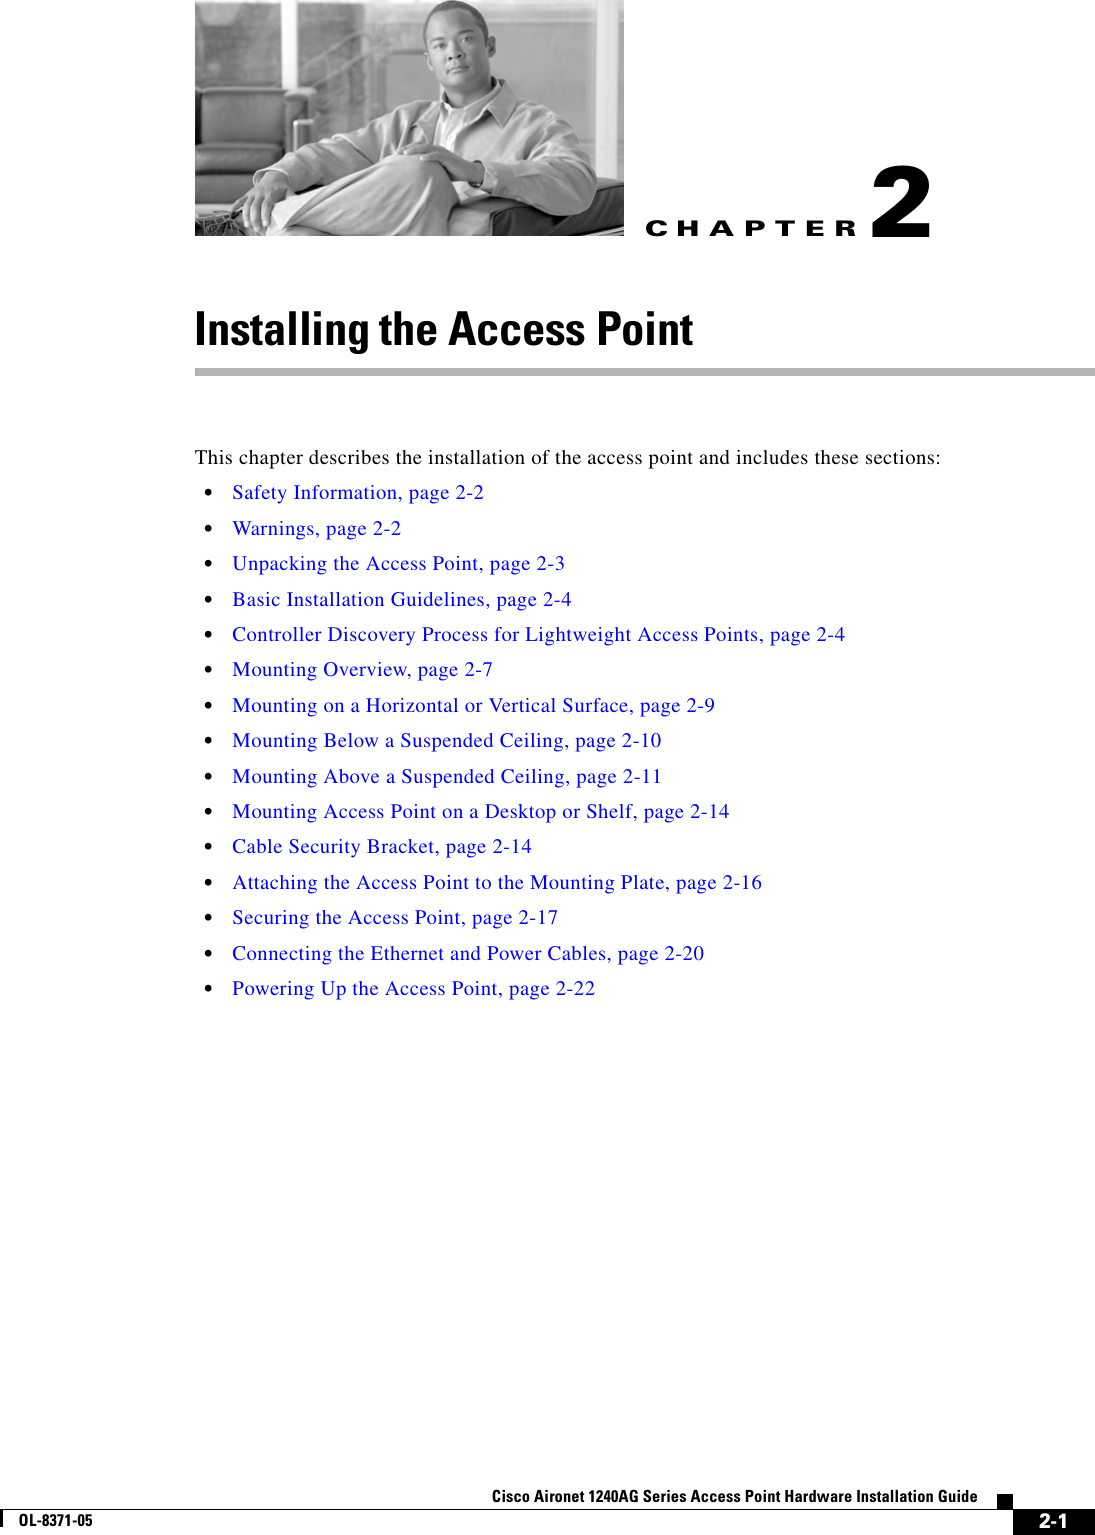 CHAPTER 2-1Cisco Aironet 1240AG Series Access Point Hardware Installation GuideOL-8371-052Installing the Access PointThis chapter describes the installation of the access point and includes these sections:•Safety Information, page 2-2•Warnings, page 2-2•Unpacking the Access Point, page 2-3•Basic Installation Guidelines, page 2-4•Controller Discovery Process for Lightweight Access Points, page 2-4•Mounting Overview, page 2-7•Mounting on a Horizontal or Vertical Surface, page 2-9•Mounting Below a Suspended Ceiling, page 2-10•Mounting Above a Suspended Ceiling, page 2-11•Mounting Access Point on a Desktop or Shelf, page 2-14•Cable Security Bracket, page 2-14•Attaching the Access Point to the Mounting Plate, page 2-16•Securing the Access Point, page 2-17•Connecting the Ethernet and Power Cables, page 2-20•Powering Up the Access Point, page 2-22